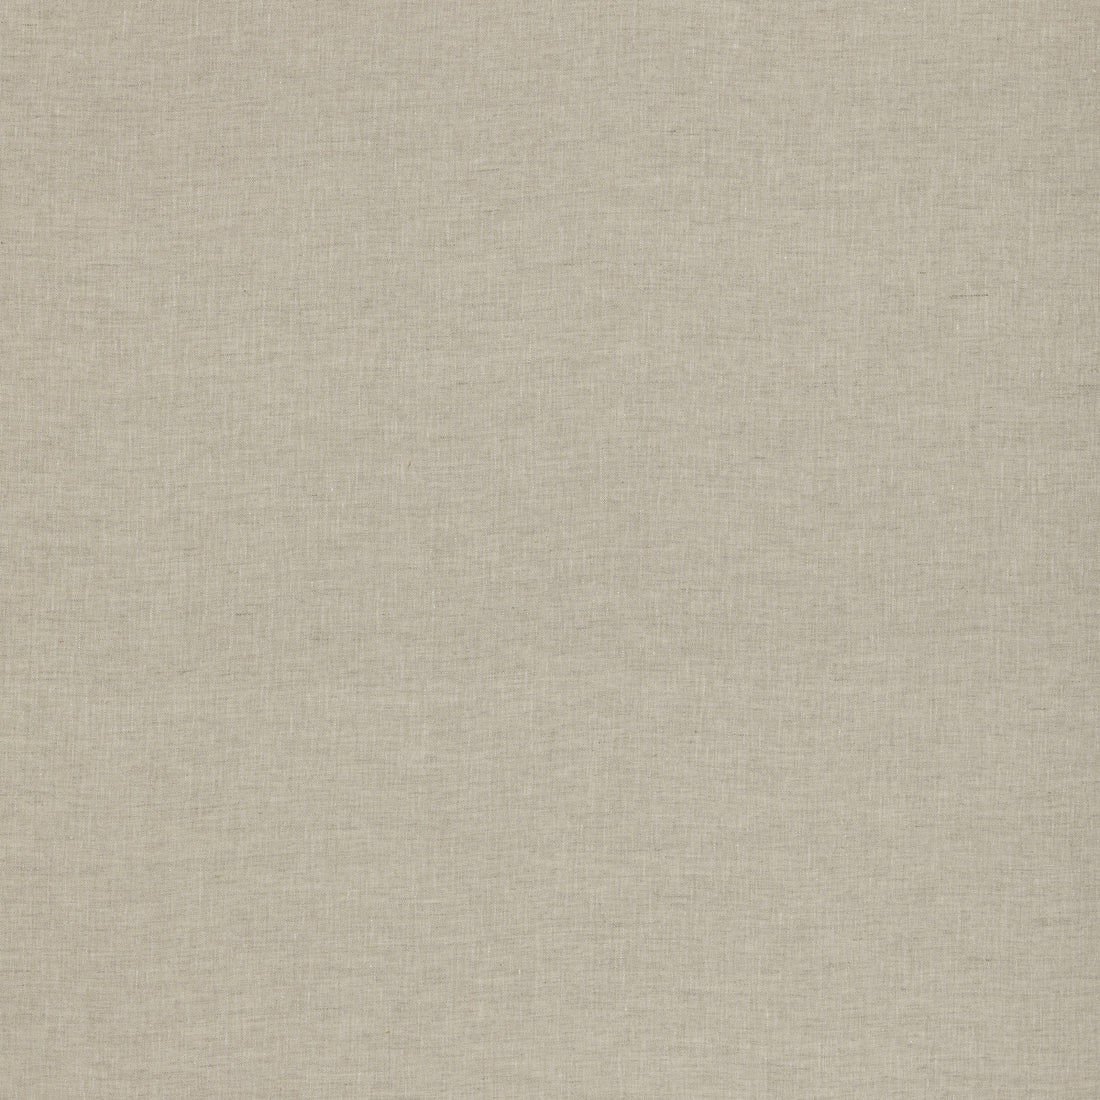 Flint fabric in parchment color - pattern ED85385.225.0 - by Threads in the Quintessential Naturals collection